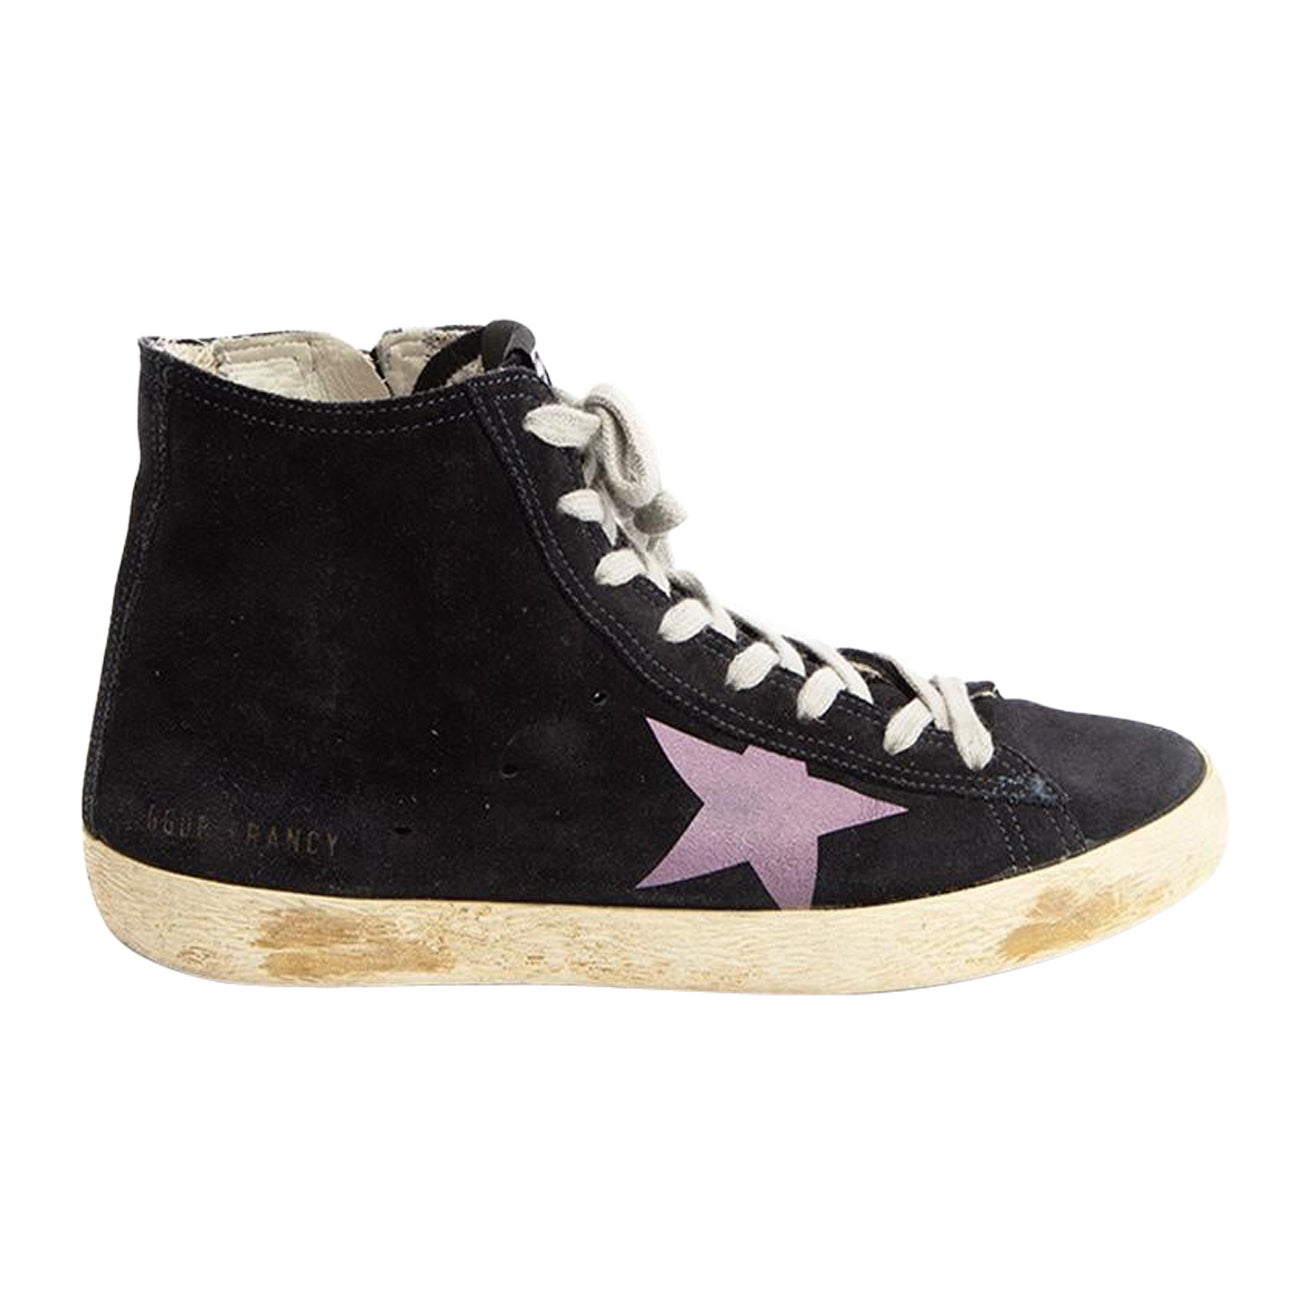 Black Suede Francy High Top Trainers Size IT 37 For Sale